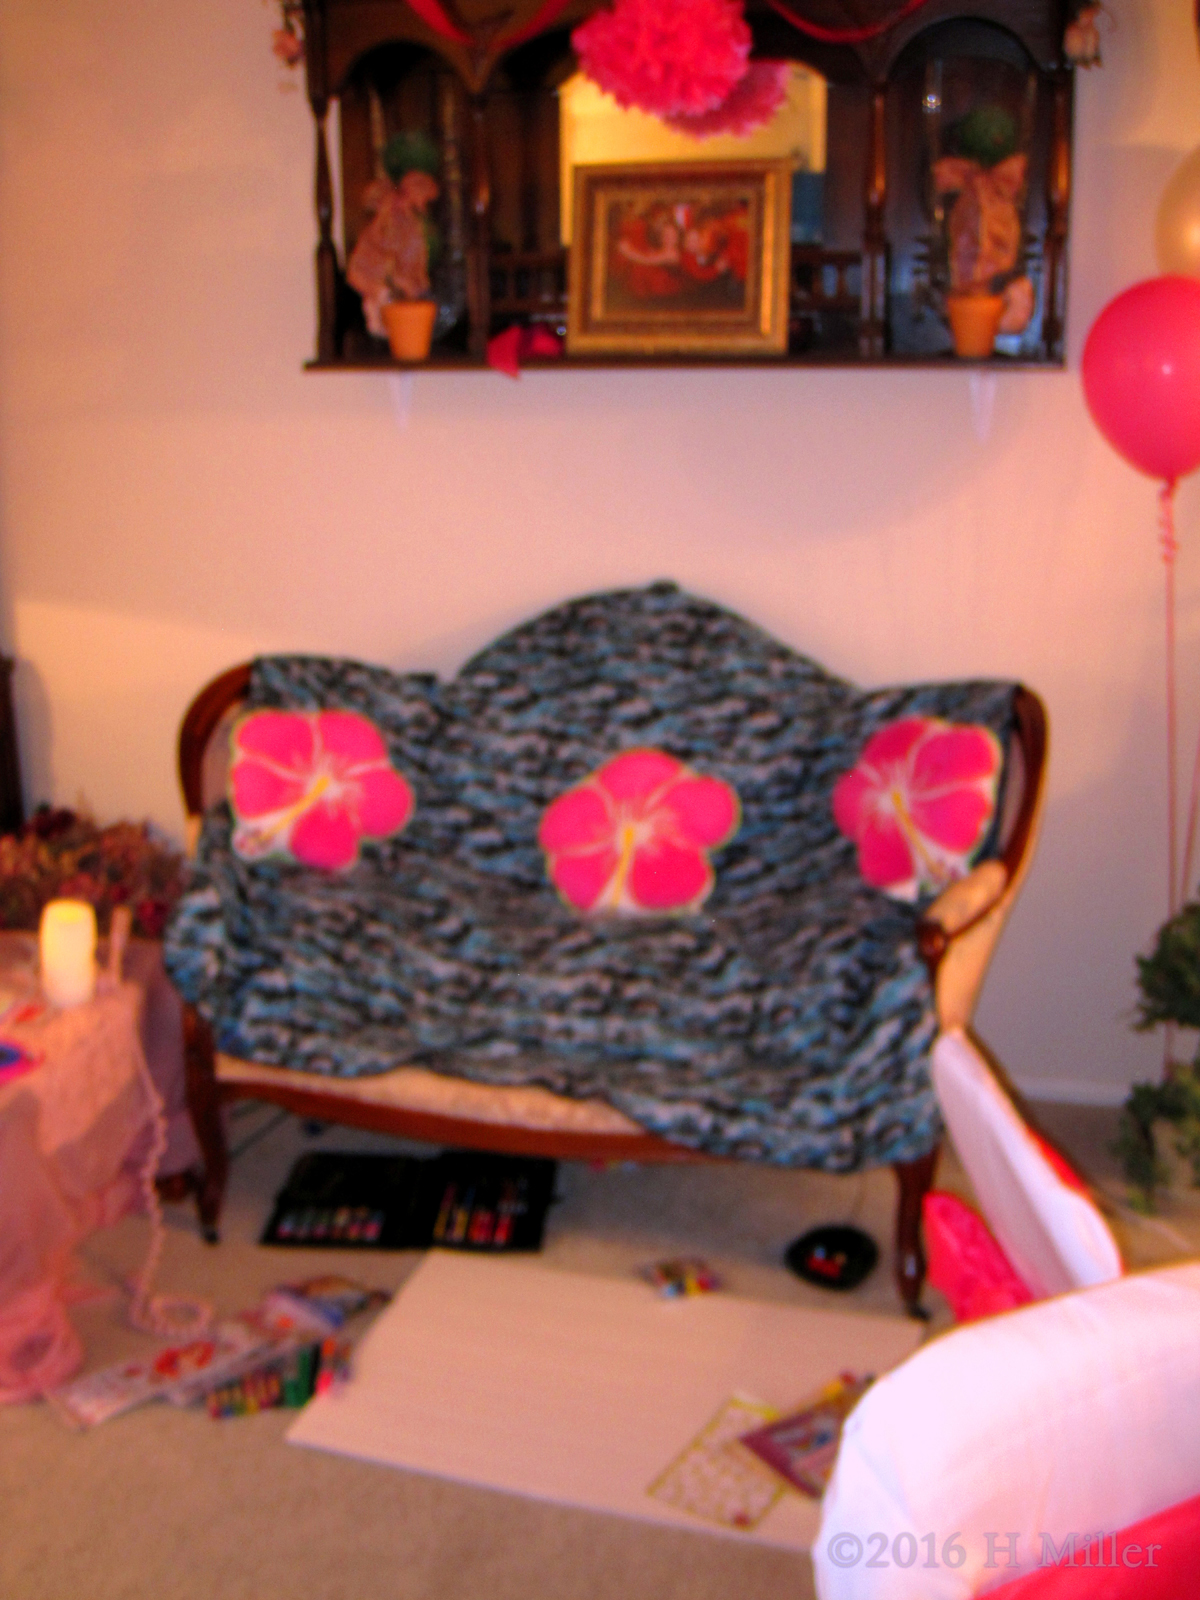 The Spa Couch And Spa Birthday Card Setup. 